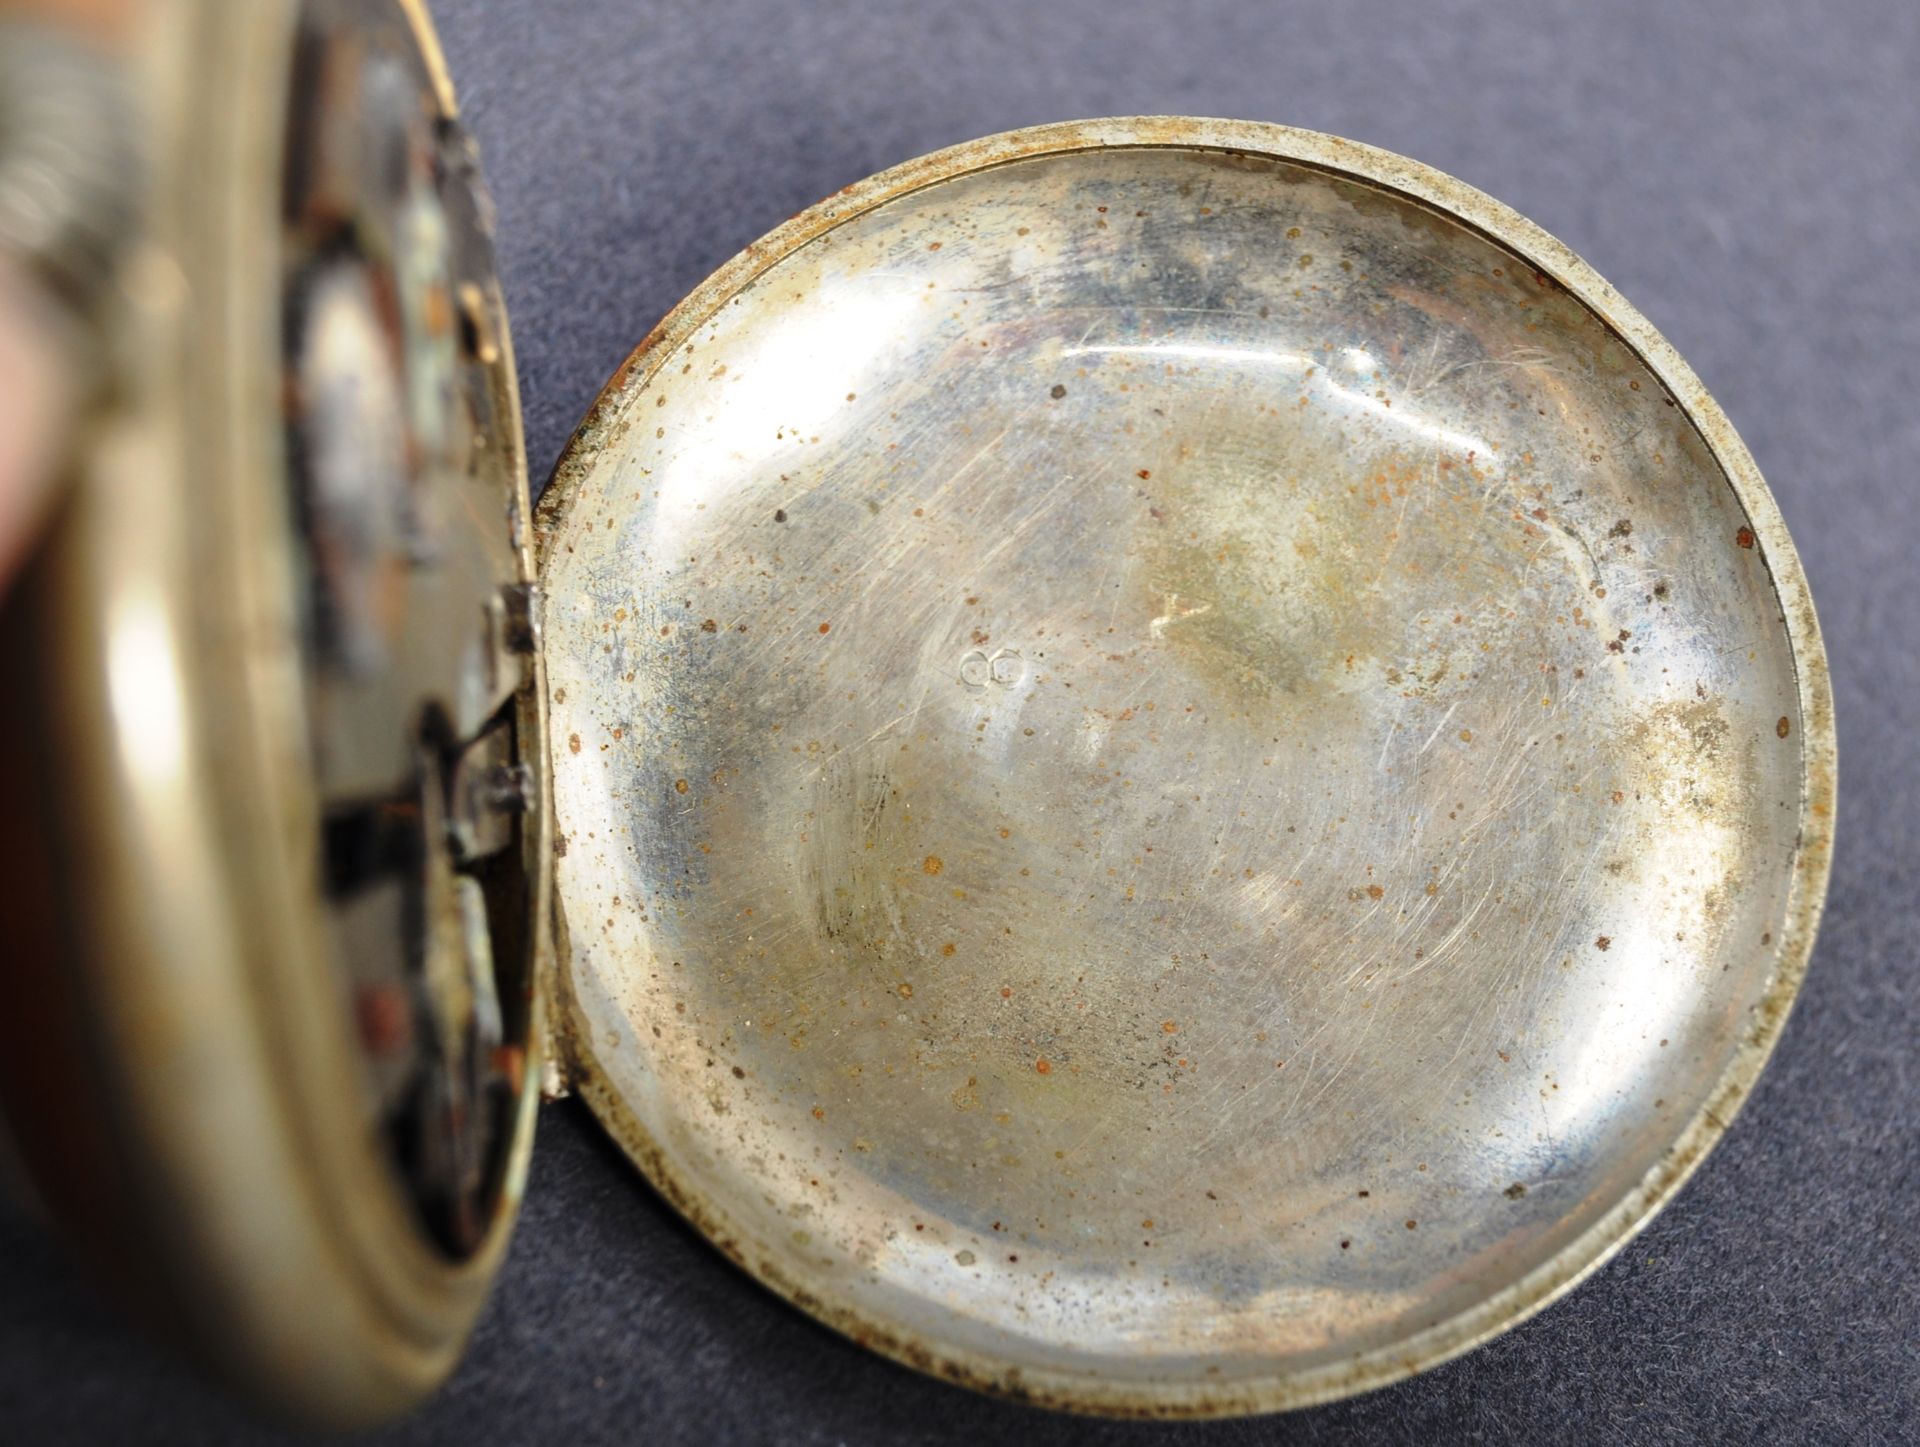 MAHATMA GANDHI - SILVER PLATE POCKET WATCH GIFTED FROM GANDHI - Image 4 of 7